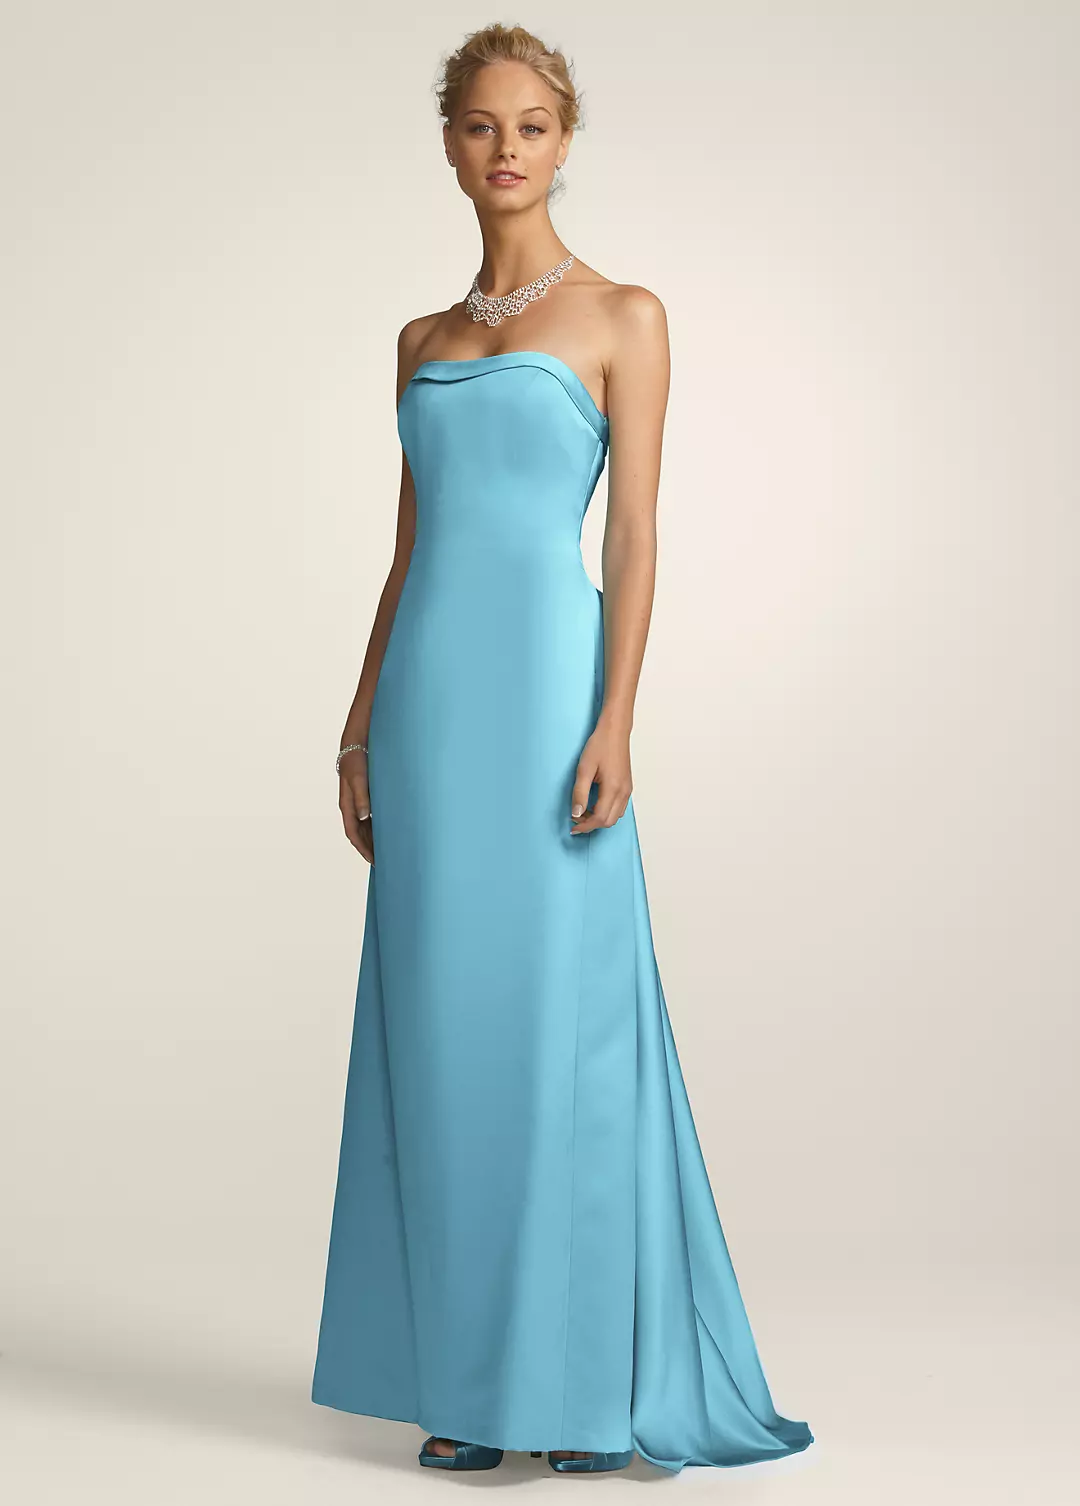 Strapless A-line with Cascading Back Image